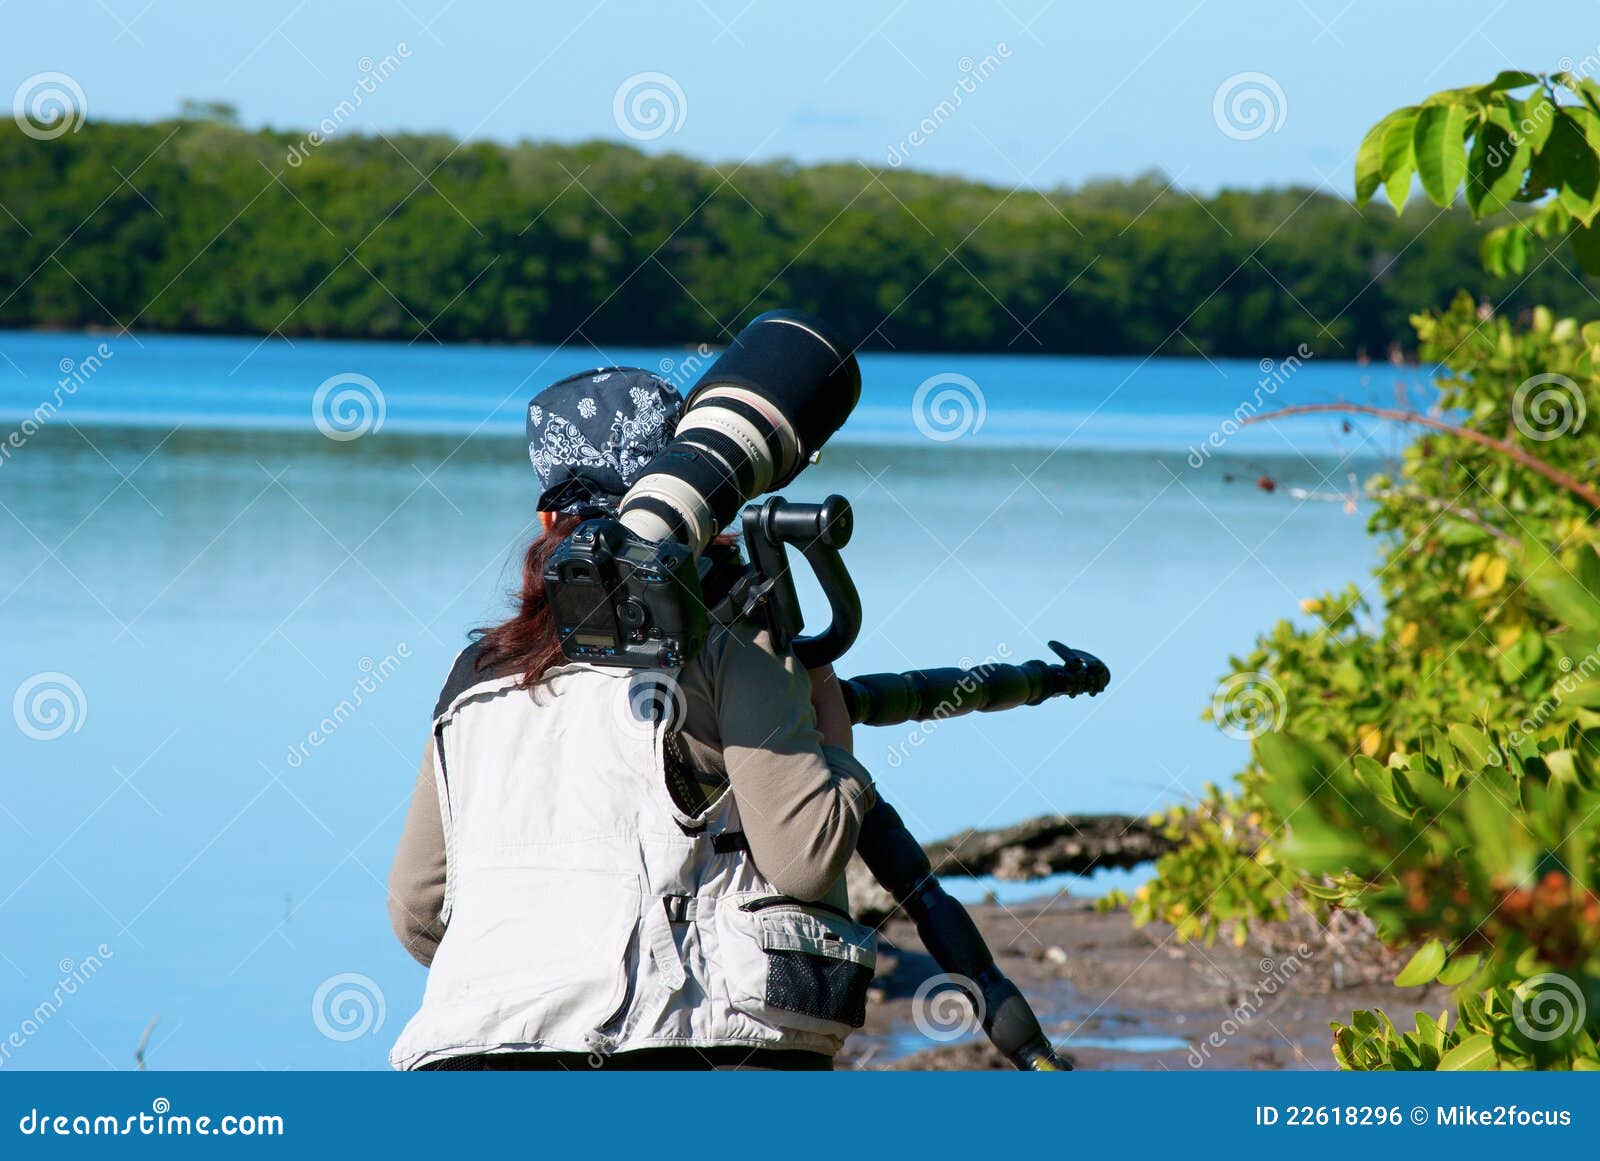 Forblive Watt afstand Professional Female Nature Photographer Stock Photo - Image of lady,  equipment: 22618296